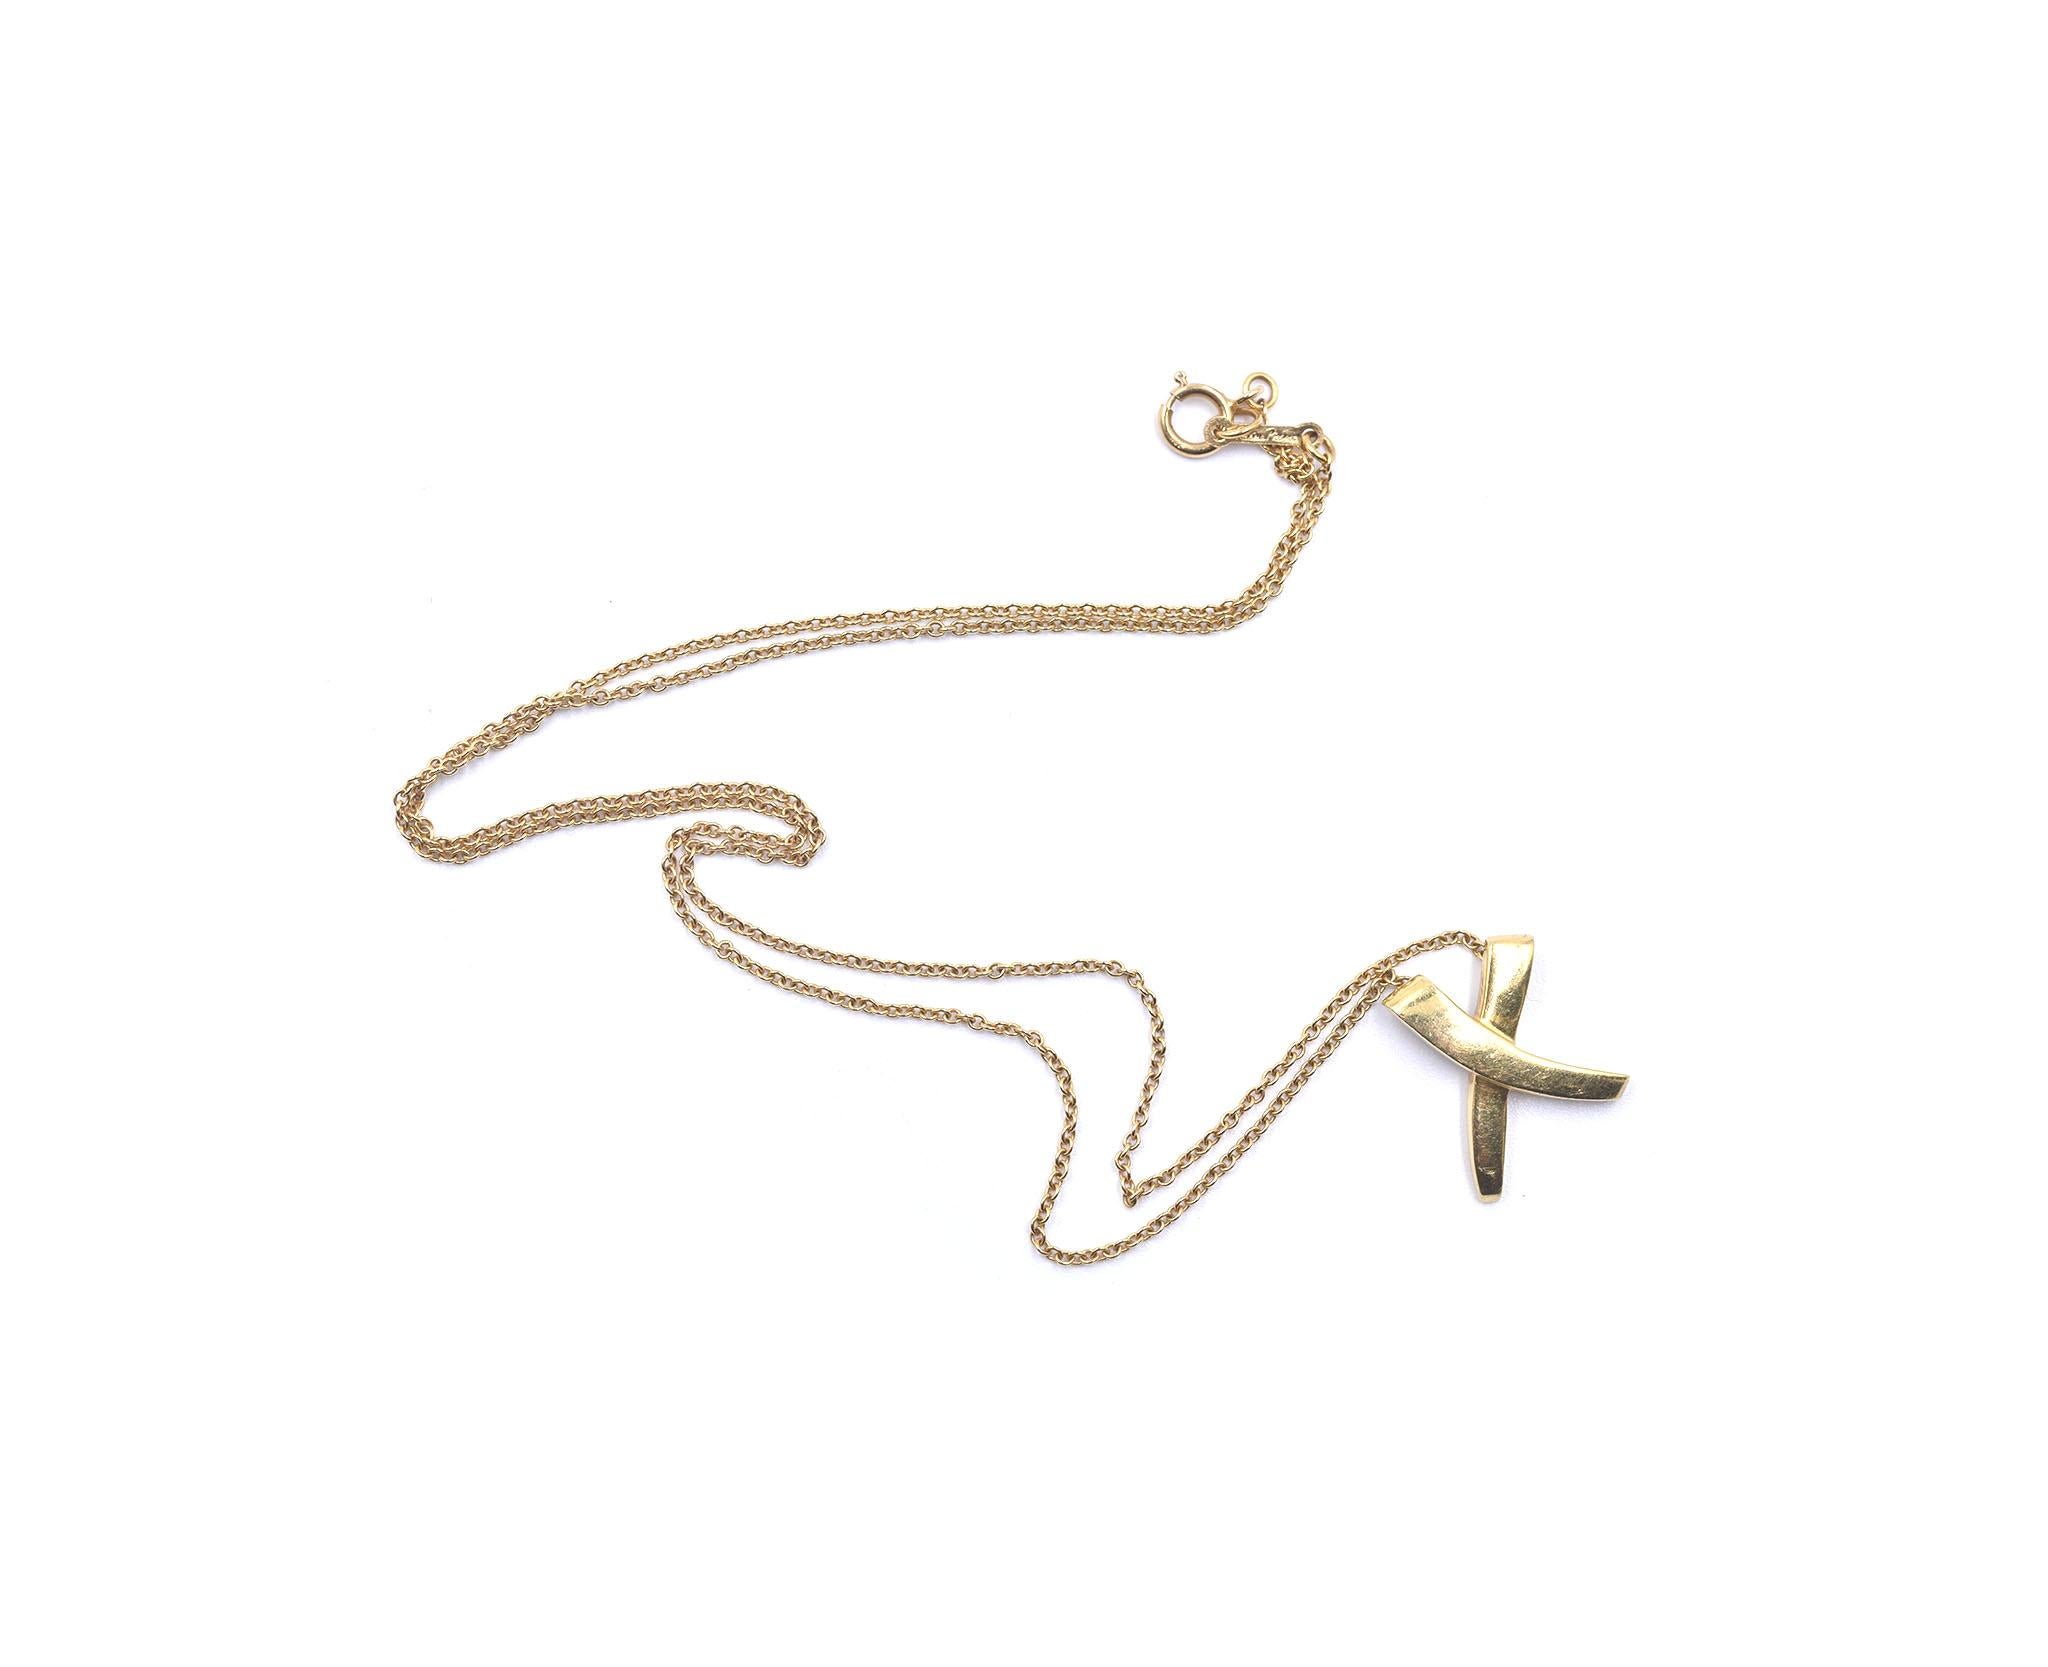 Designer: Tiffany & Co. / Paloma Picasso
Material: 18K yellow gold
Dimensions: necklace measures 16-inches
Weight: 3.38 grams
